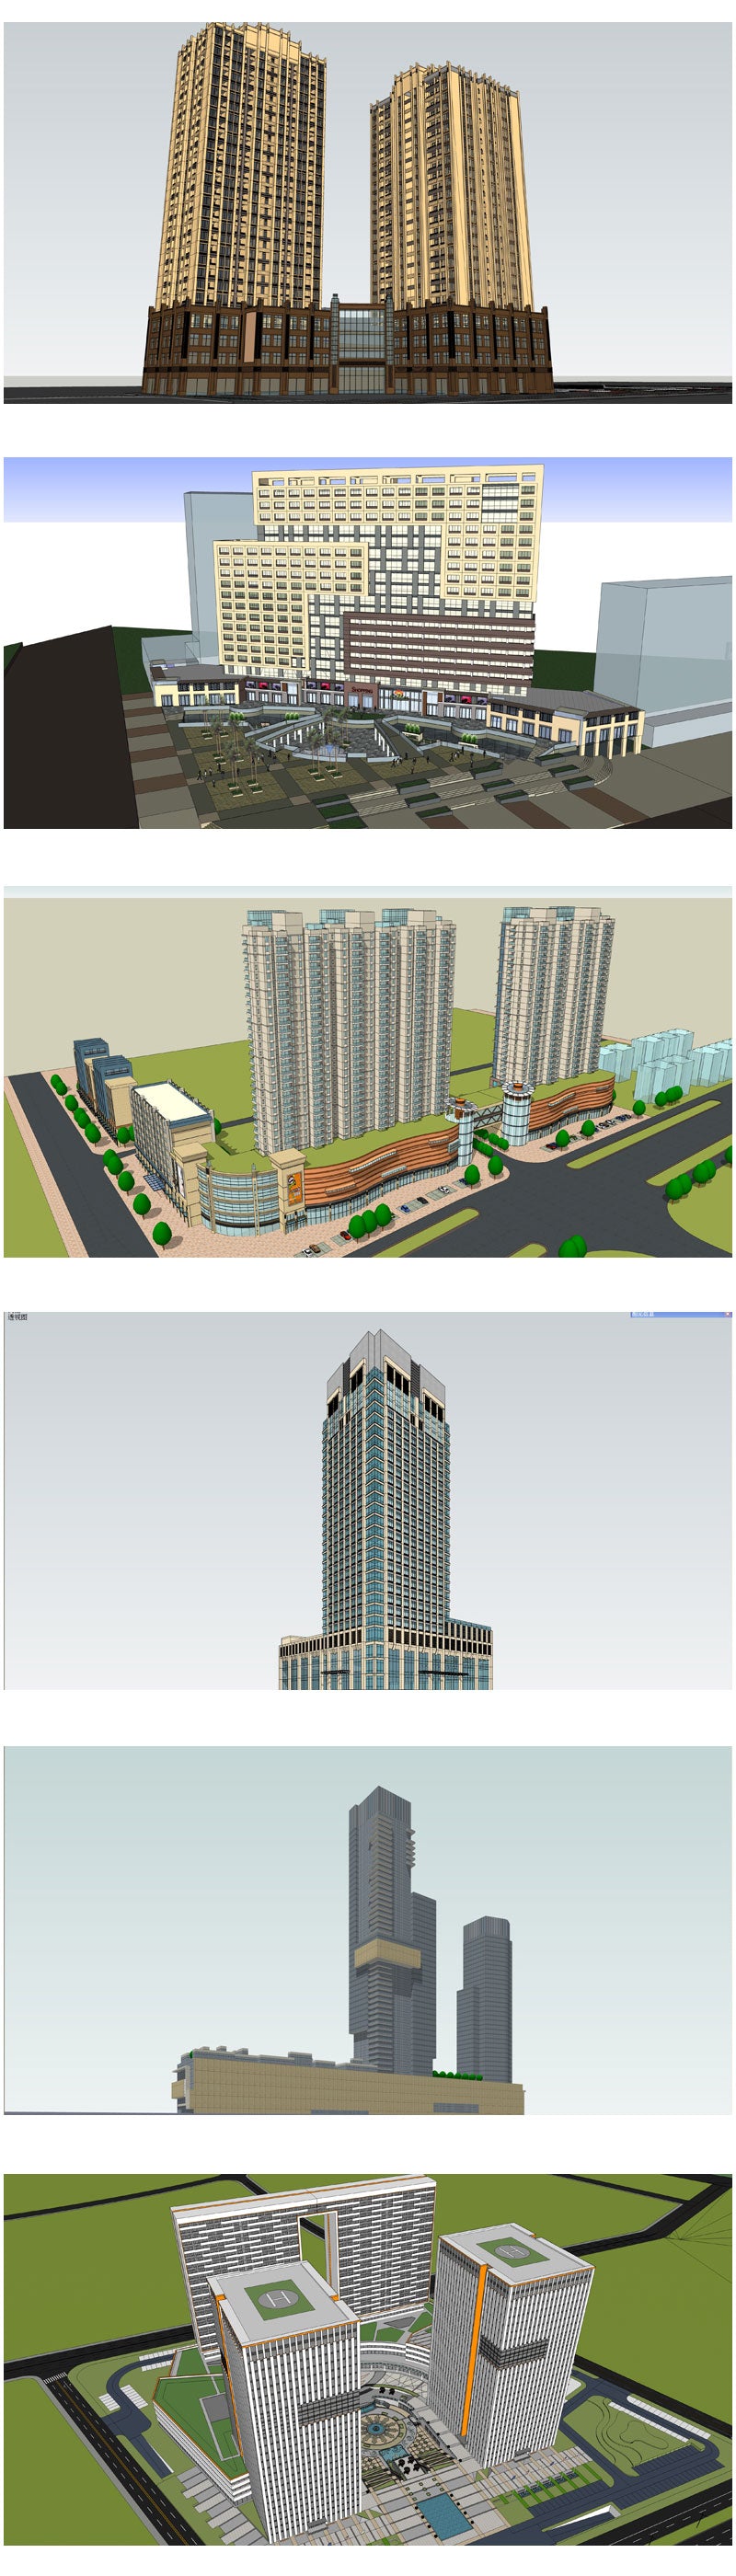 ★Best 20 Types of City,Residential Building Sketchup 3D Models Collection(Recommanded!!)